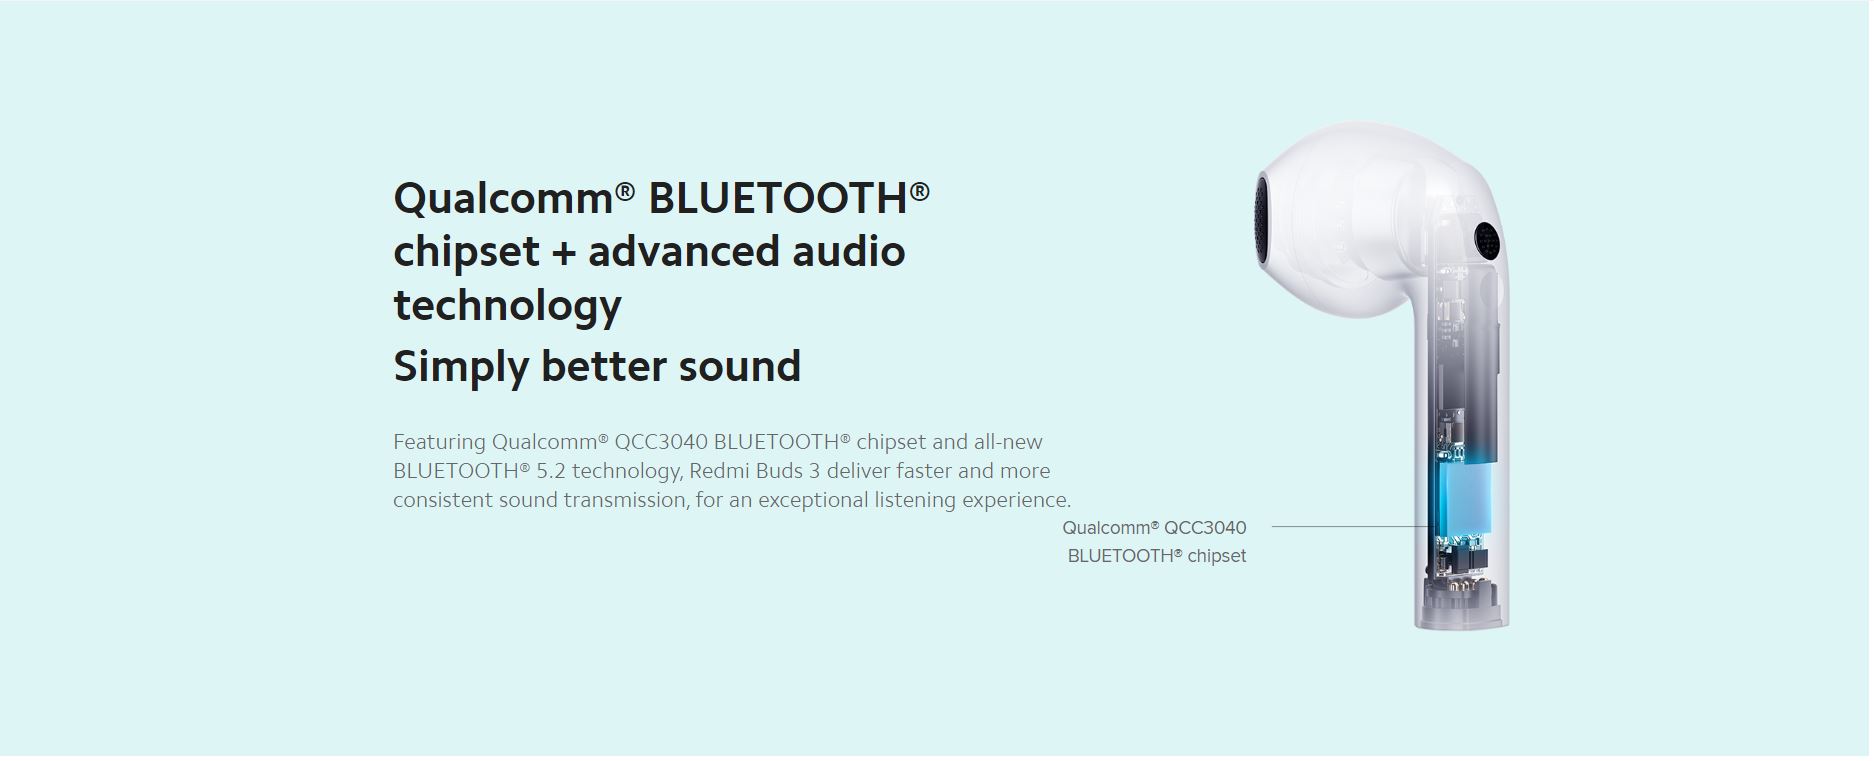 Xiaomi Redmi Buds 3 wireless earbuds - Bluetooth 5.2 - up to 20-hours total play time - 12mm dynamic driver - Dual-microphone noise cancellation - M2104E1 - BHR5174GL - Amman Jordan - Pccircle